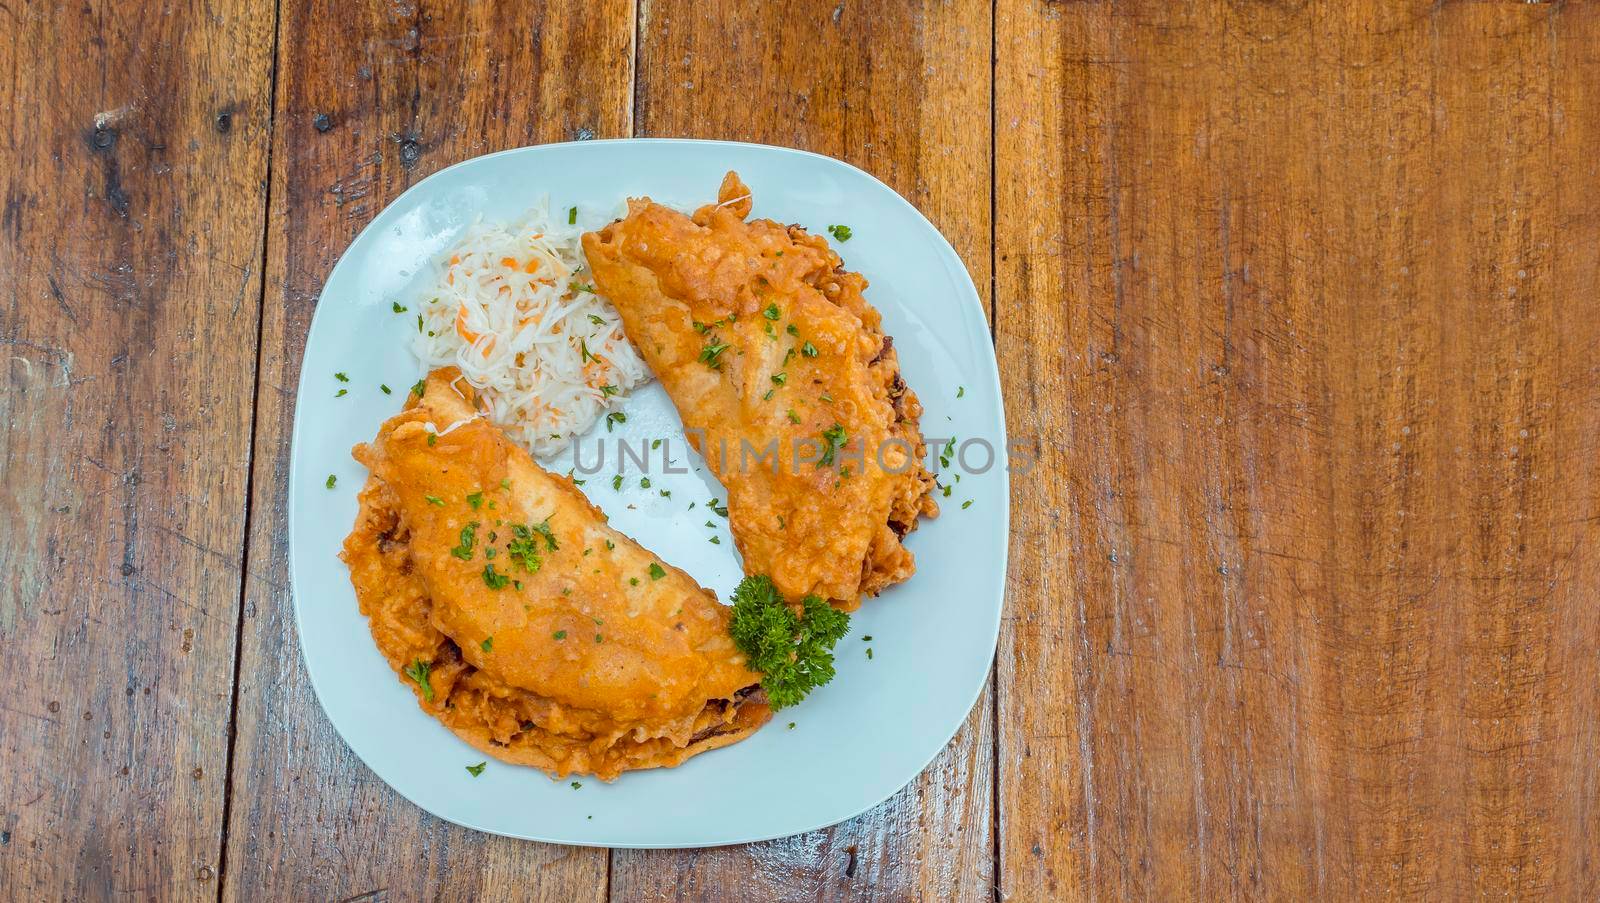 Enchilada served on a plate on wooden table, two enchiladas served on wooden table